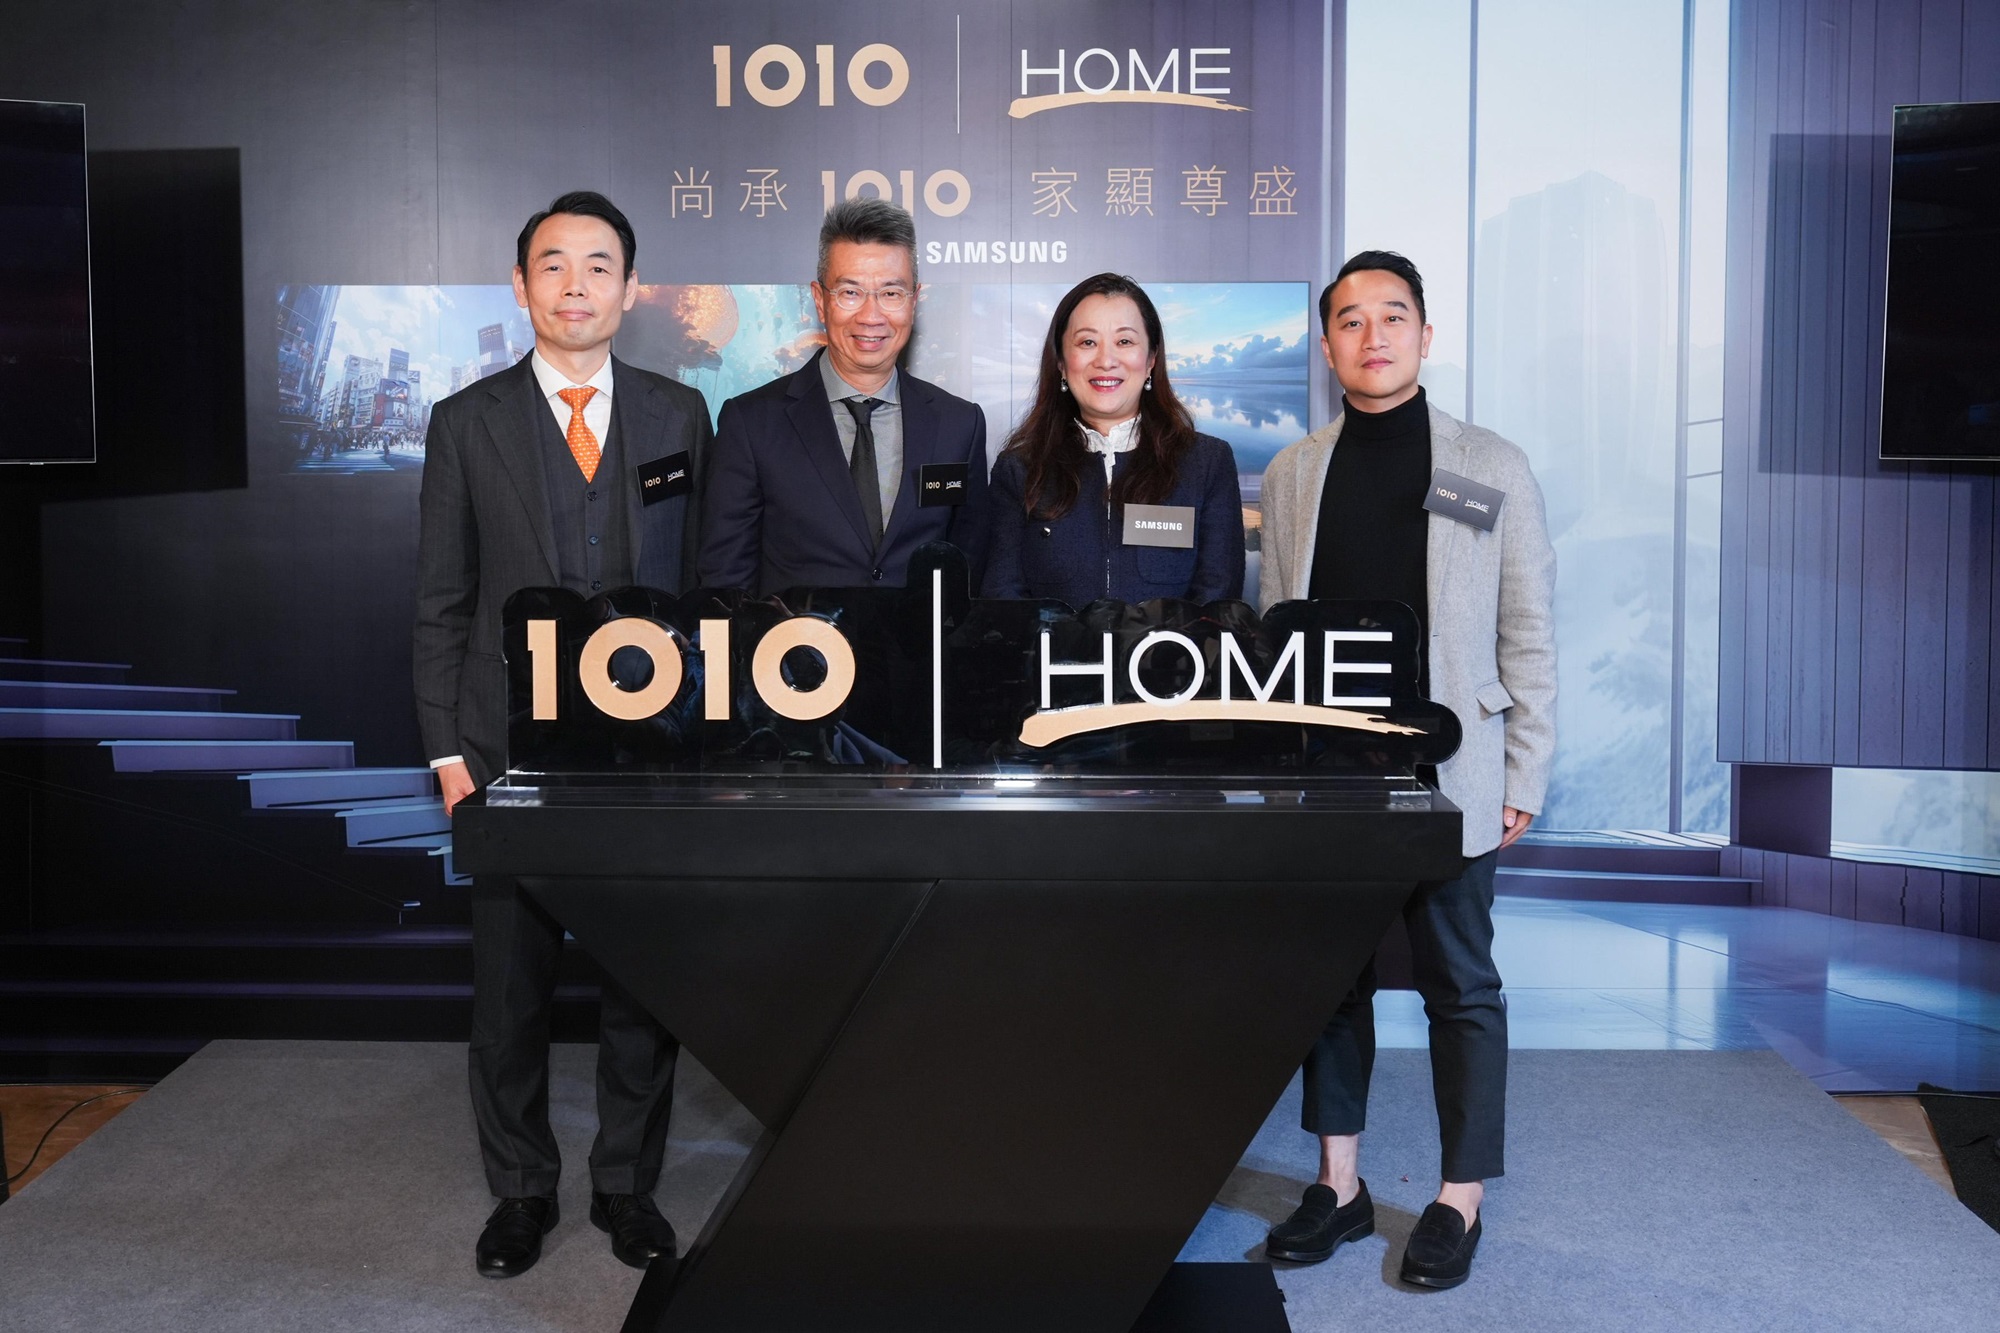 (From left to right) Ricky Kwong, Head of Network Planning and Operations, Engineering, HKT; Bruce Lam, CEO, Consumer, HKT; Yiyin Zhao, Managing Director, Samsung Electronics Hong Kong; Tommie Lo, Founder and CEO, Preface